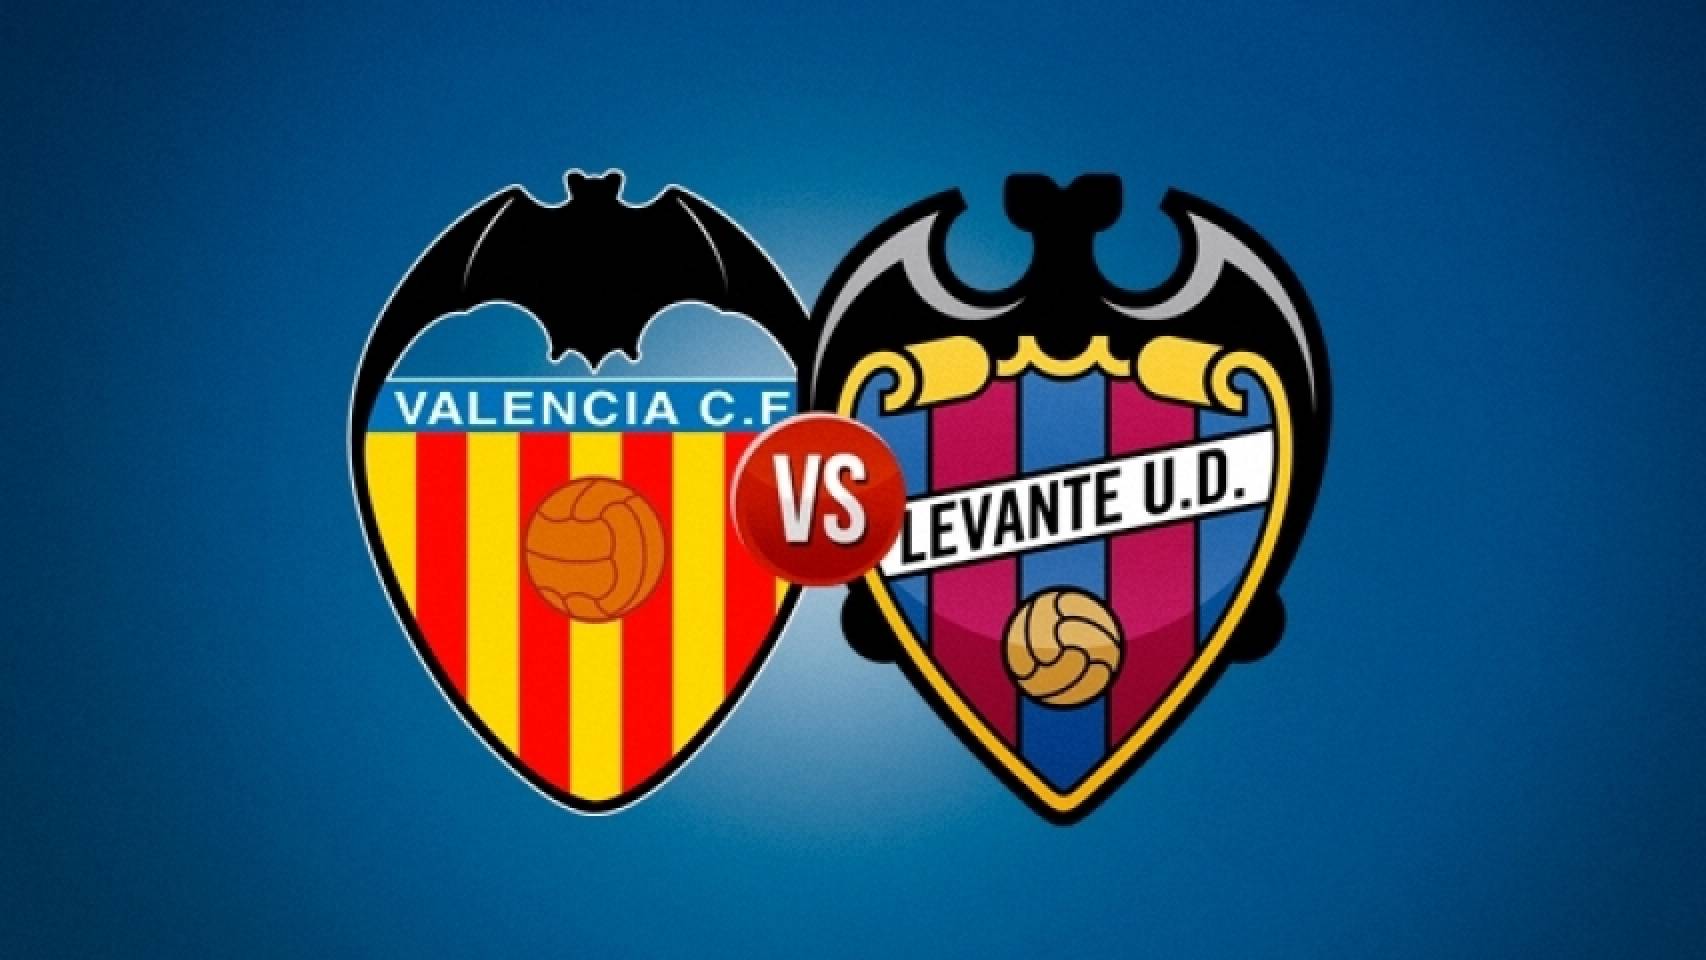 Why is there a bat on the shields of Levante UD and Valencia CF?